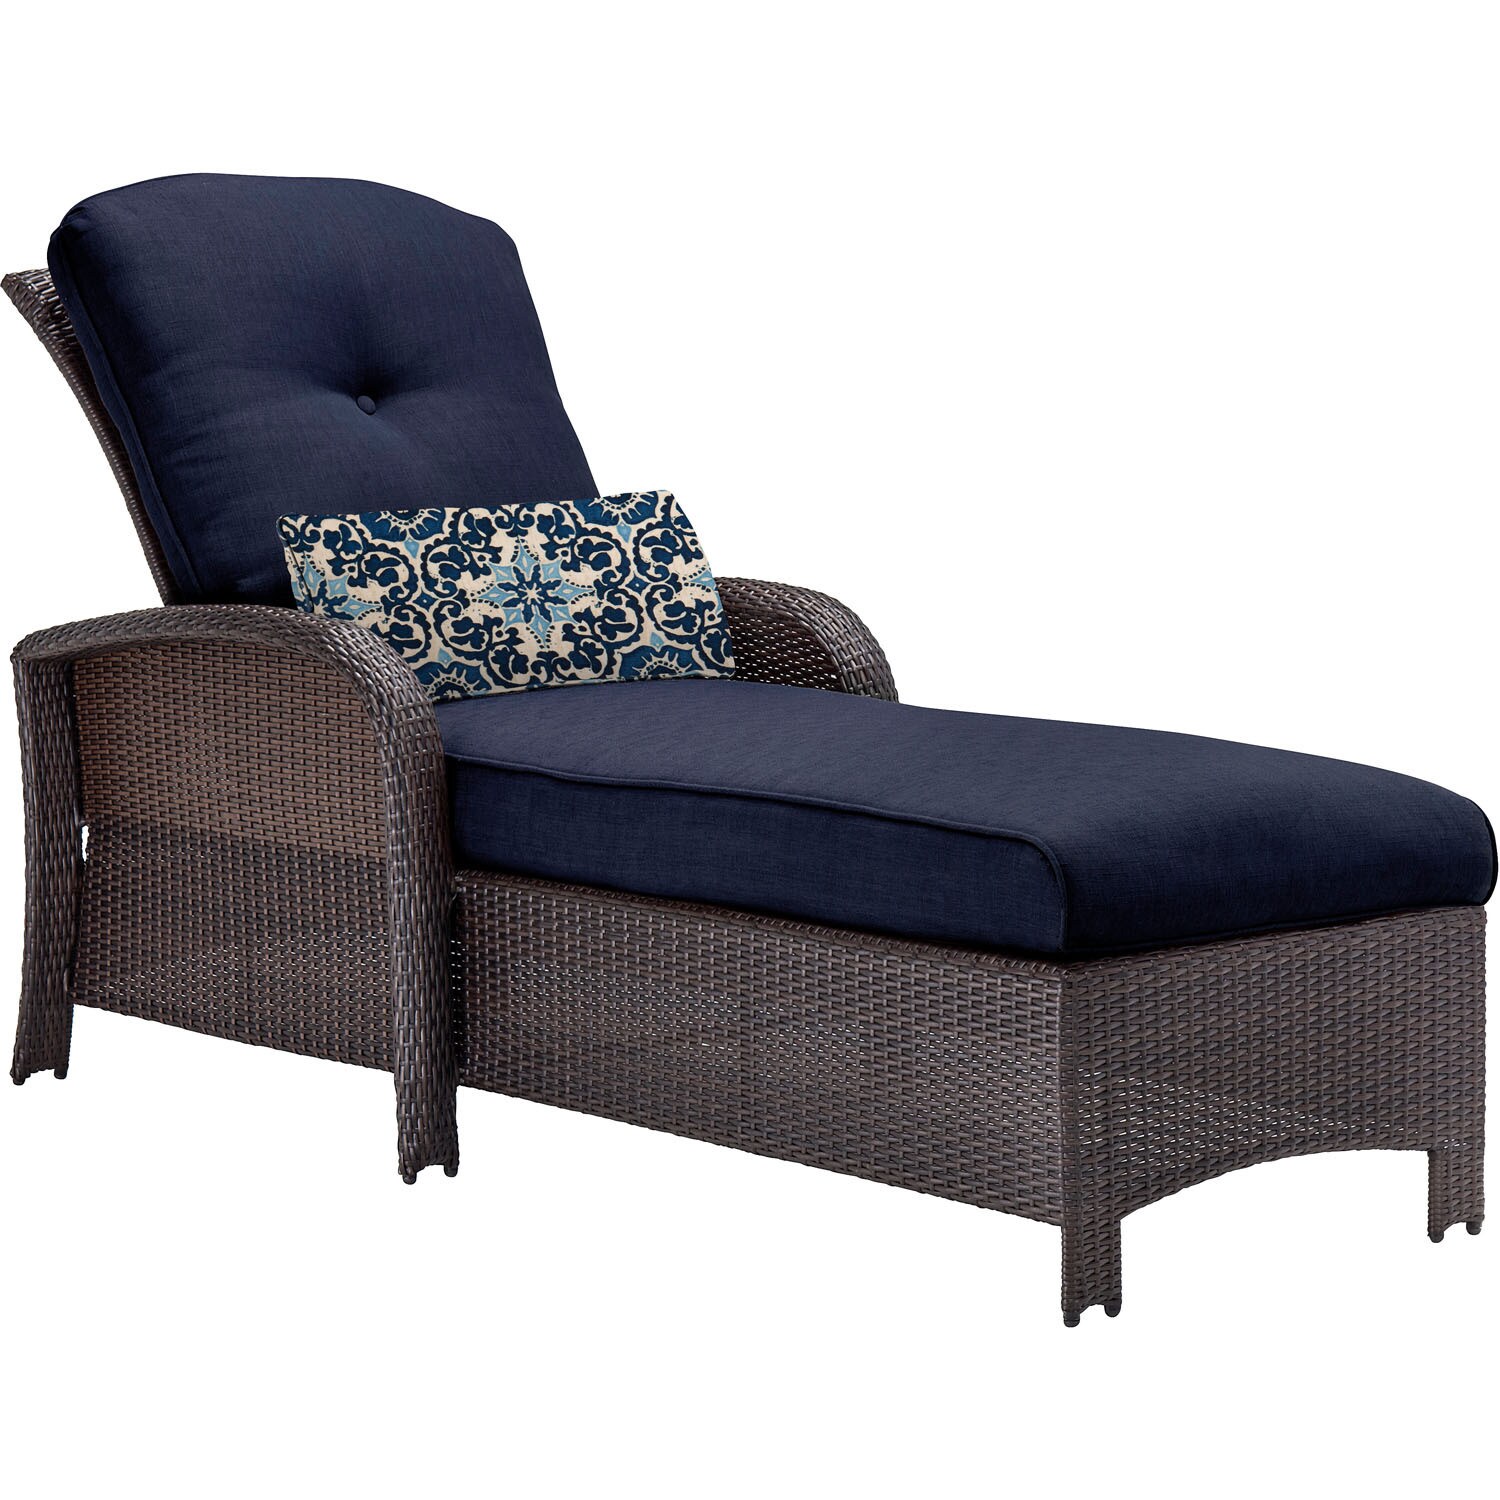 Shop Hanover Outdoor Strathmere Navy Blue Steel Chaise Lounge Chair